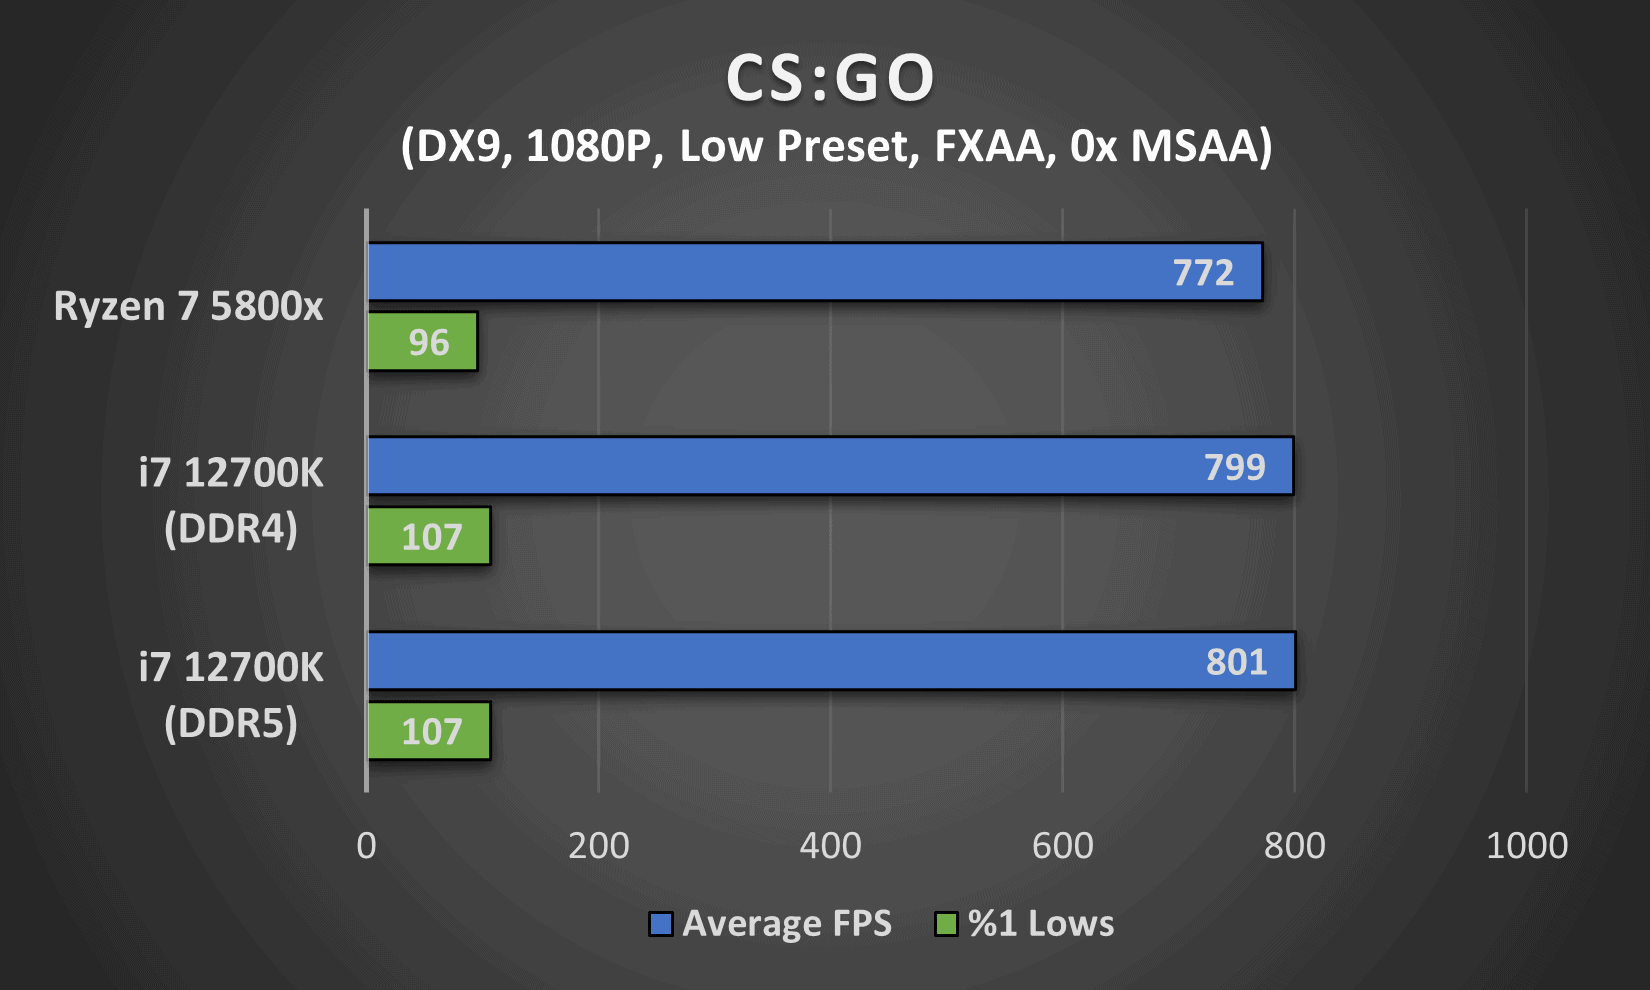 Counter Strike: Global Offensive performance comparison between Intel's i7 12700K (DDR4 and DDR5) and AMD's Ryzen 7 5800x